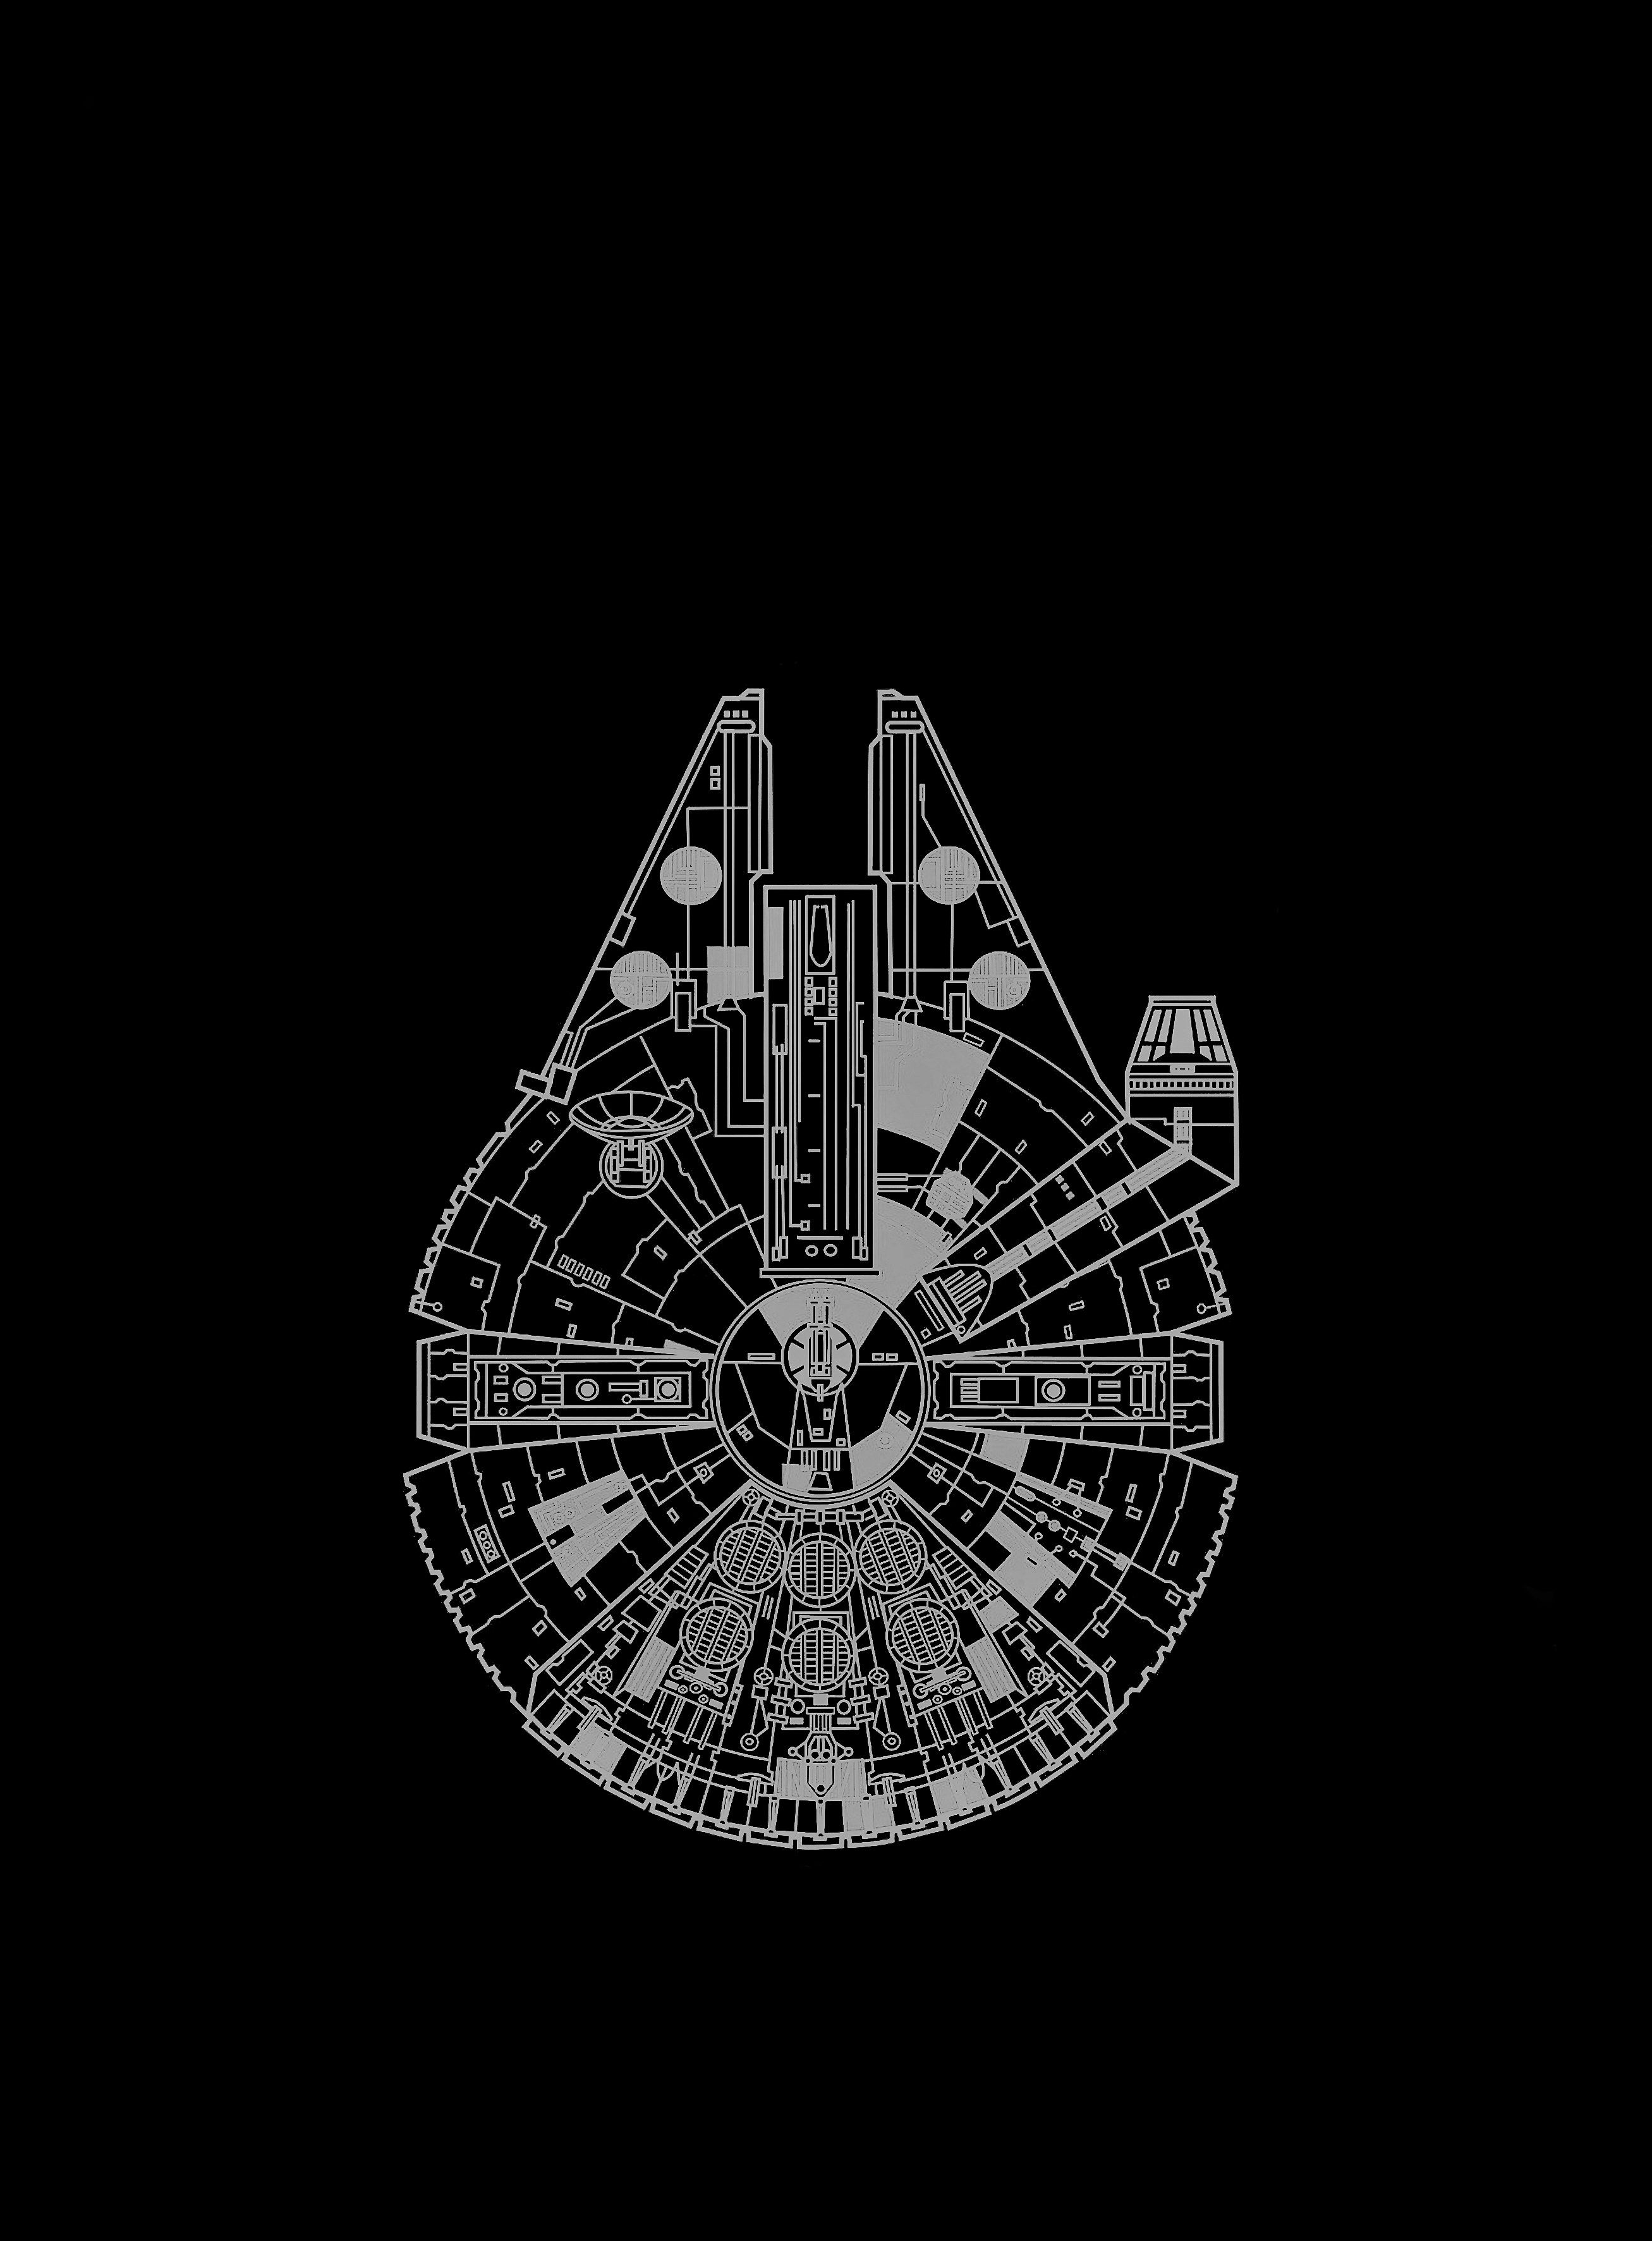 When you love Star Wars and appreciate a good AMOLED wallpaper